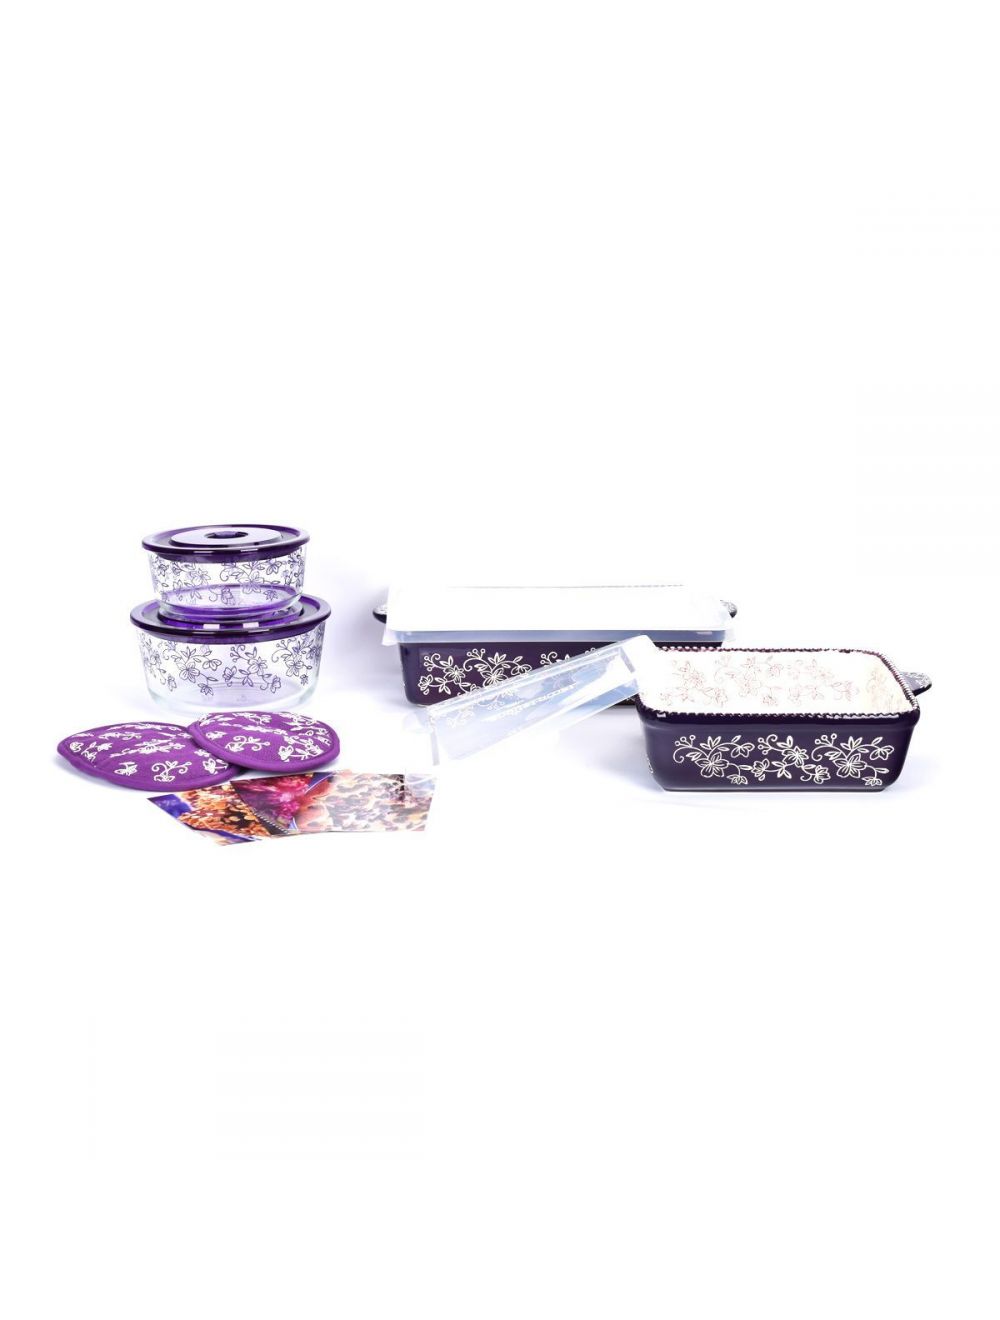 Temp-tations Floral Lace All-In-One Bakers Bundle - 7 Piece -K50685-039